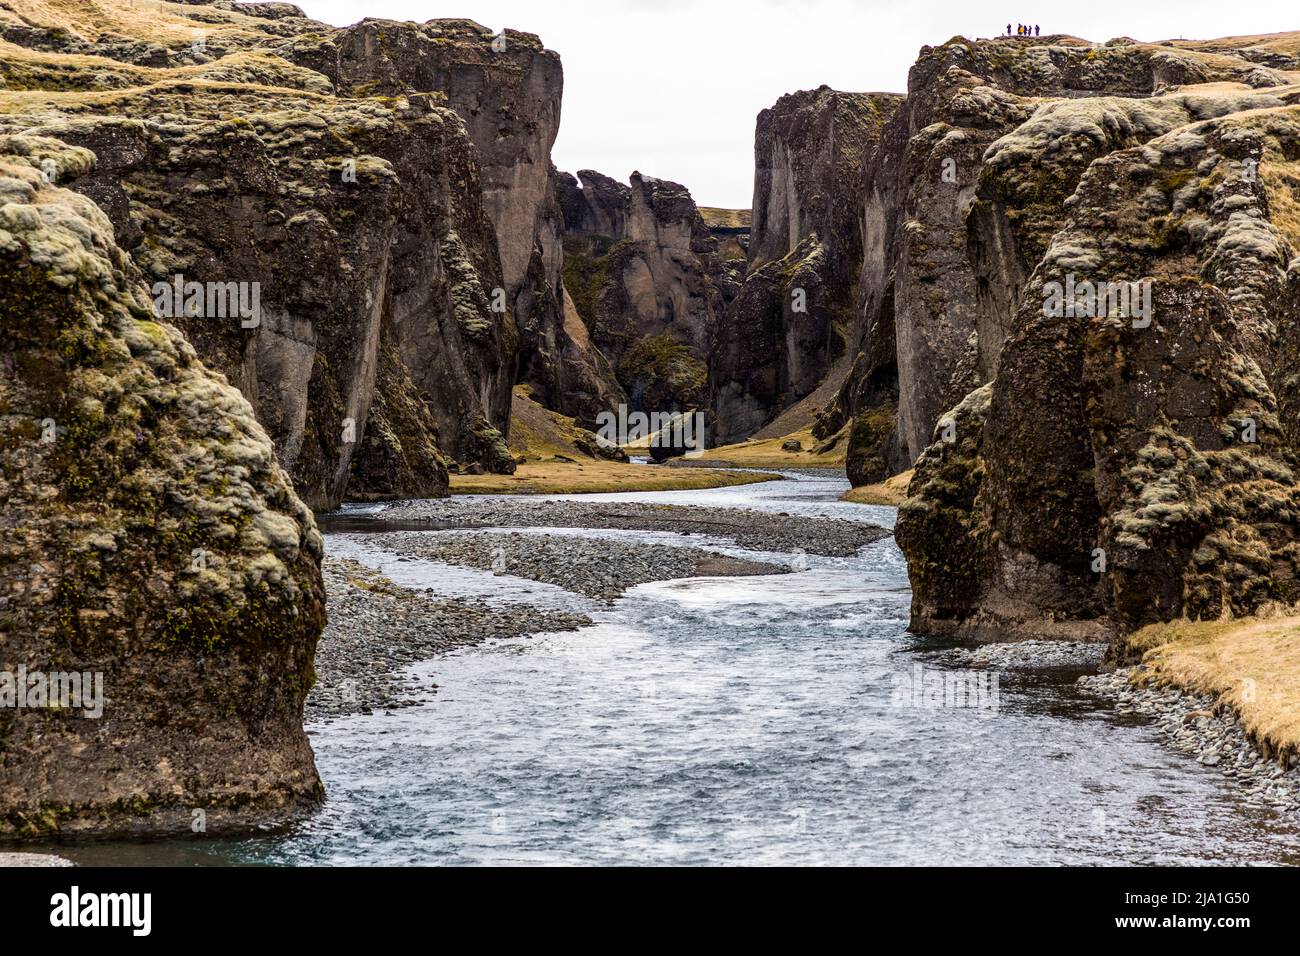 The canyon of Fjaðrárgljúfur is located near Kirkjubæjarklaustur, in Iceland. The canyon was formed by the river Fjaðrá. The river originates in the highlands and has dug up to 100 meters deep into the palagonite rock. Stock Photo